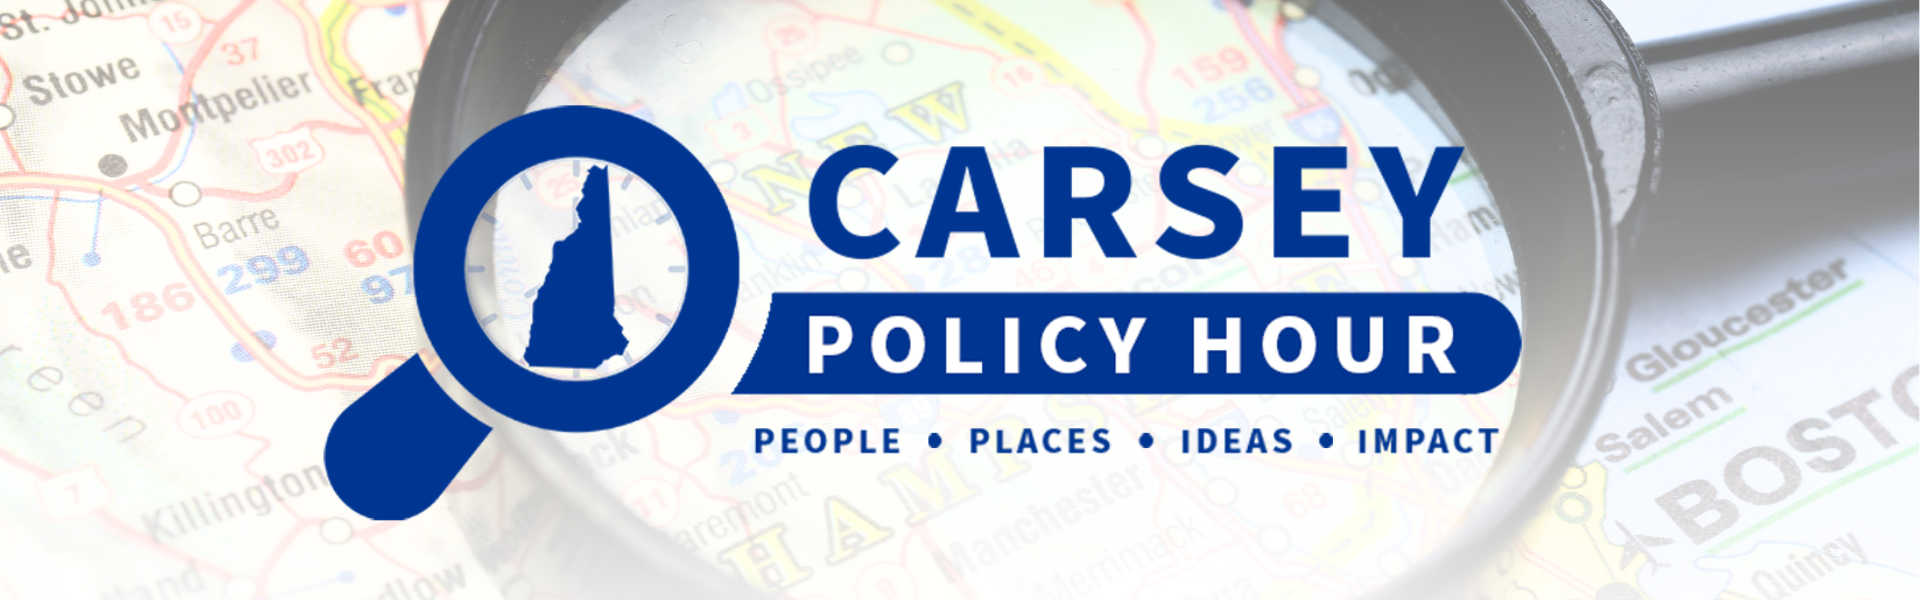 carsey policy hour logo over image of magnifying glass on map of new hampshire